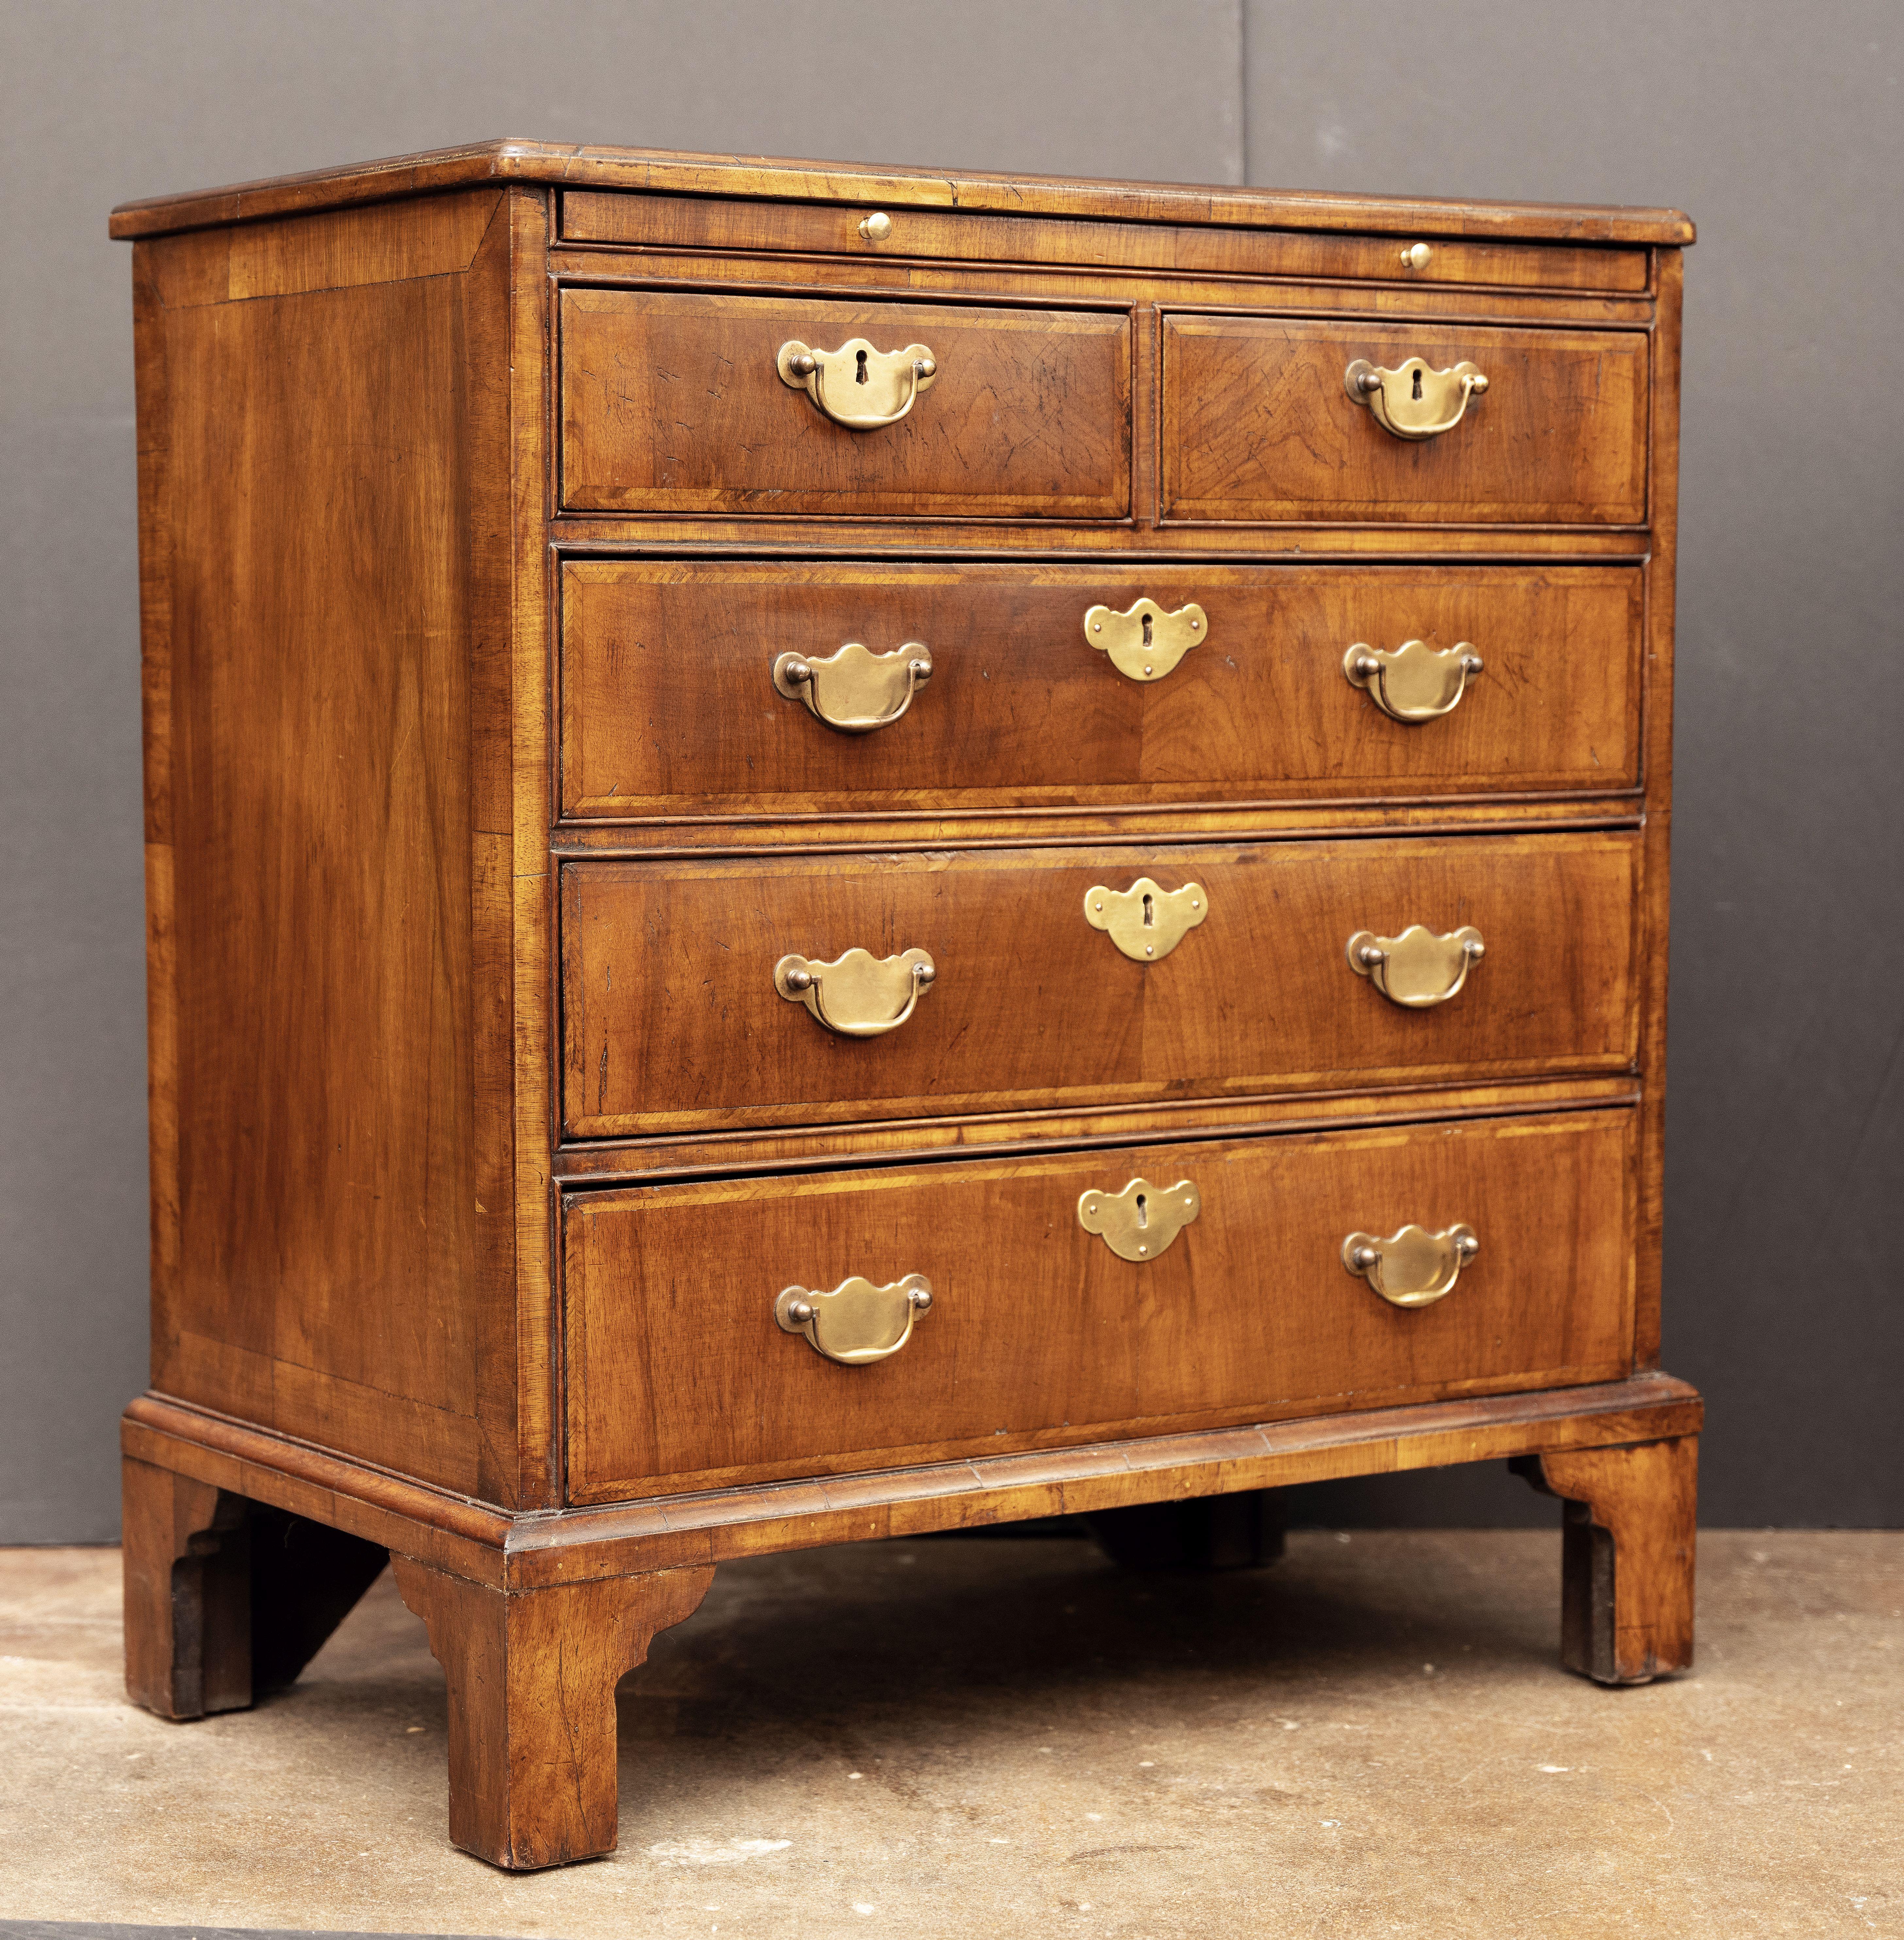 A fine pair of period English small or short bachelor's chest of drawers (or side chests) of walnut with feather banding, c.1820, from the late Georgian Era, each chest featuring a mahogany moulded top over a bachelor's slide and three drawers, all